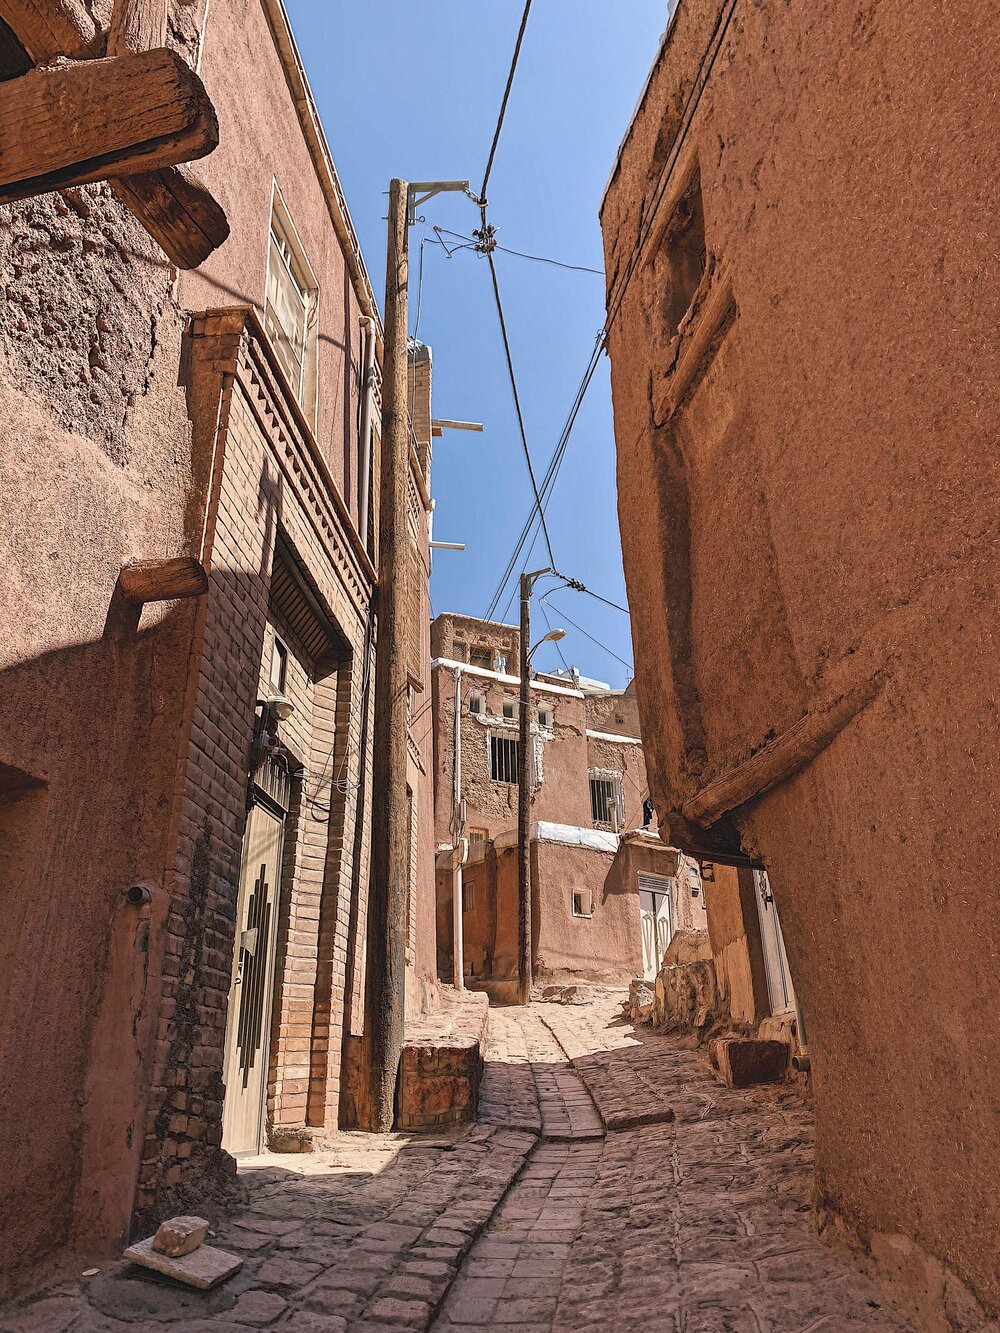 Streets of Abyaneh, Iran